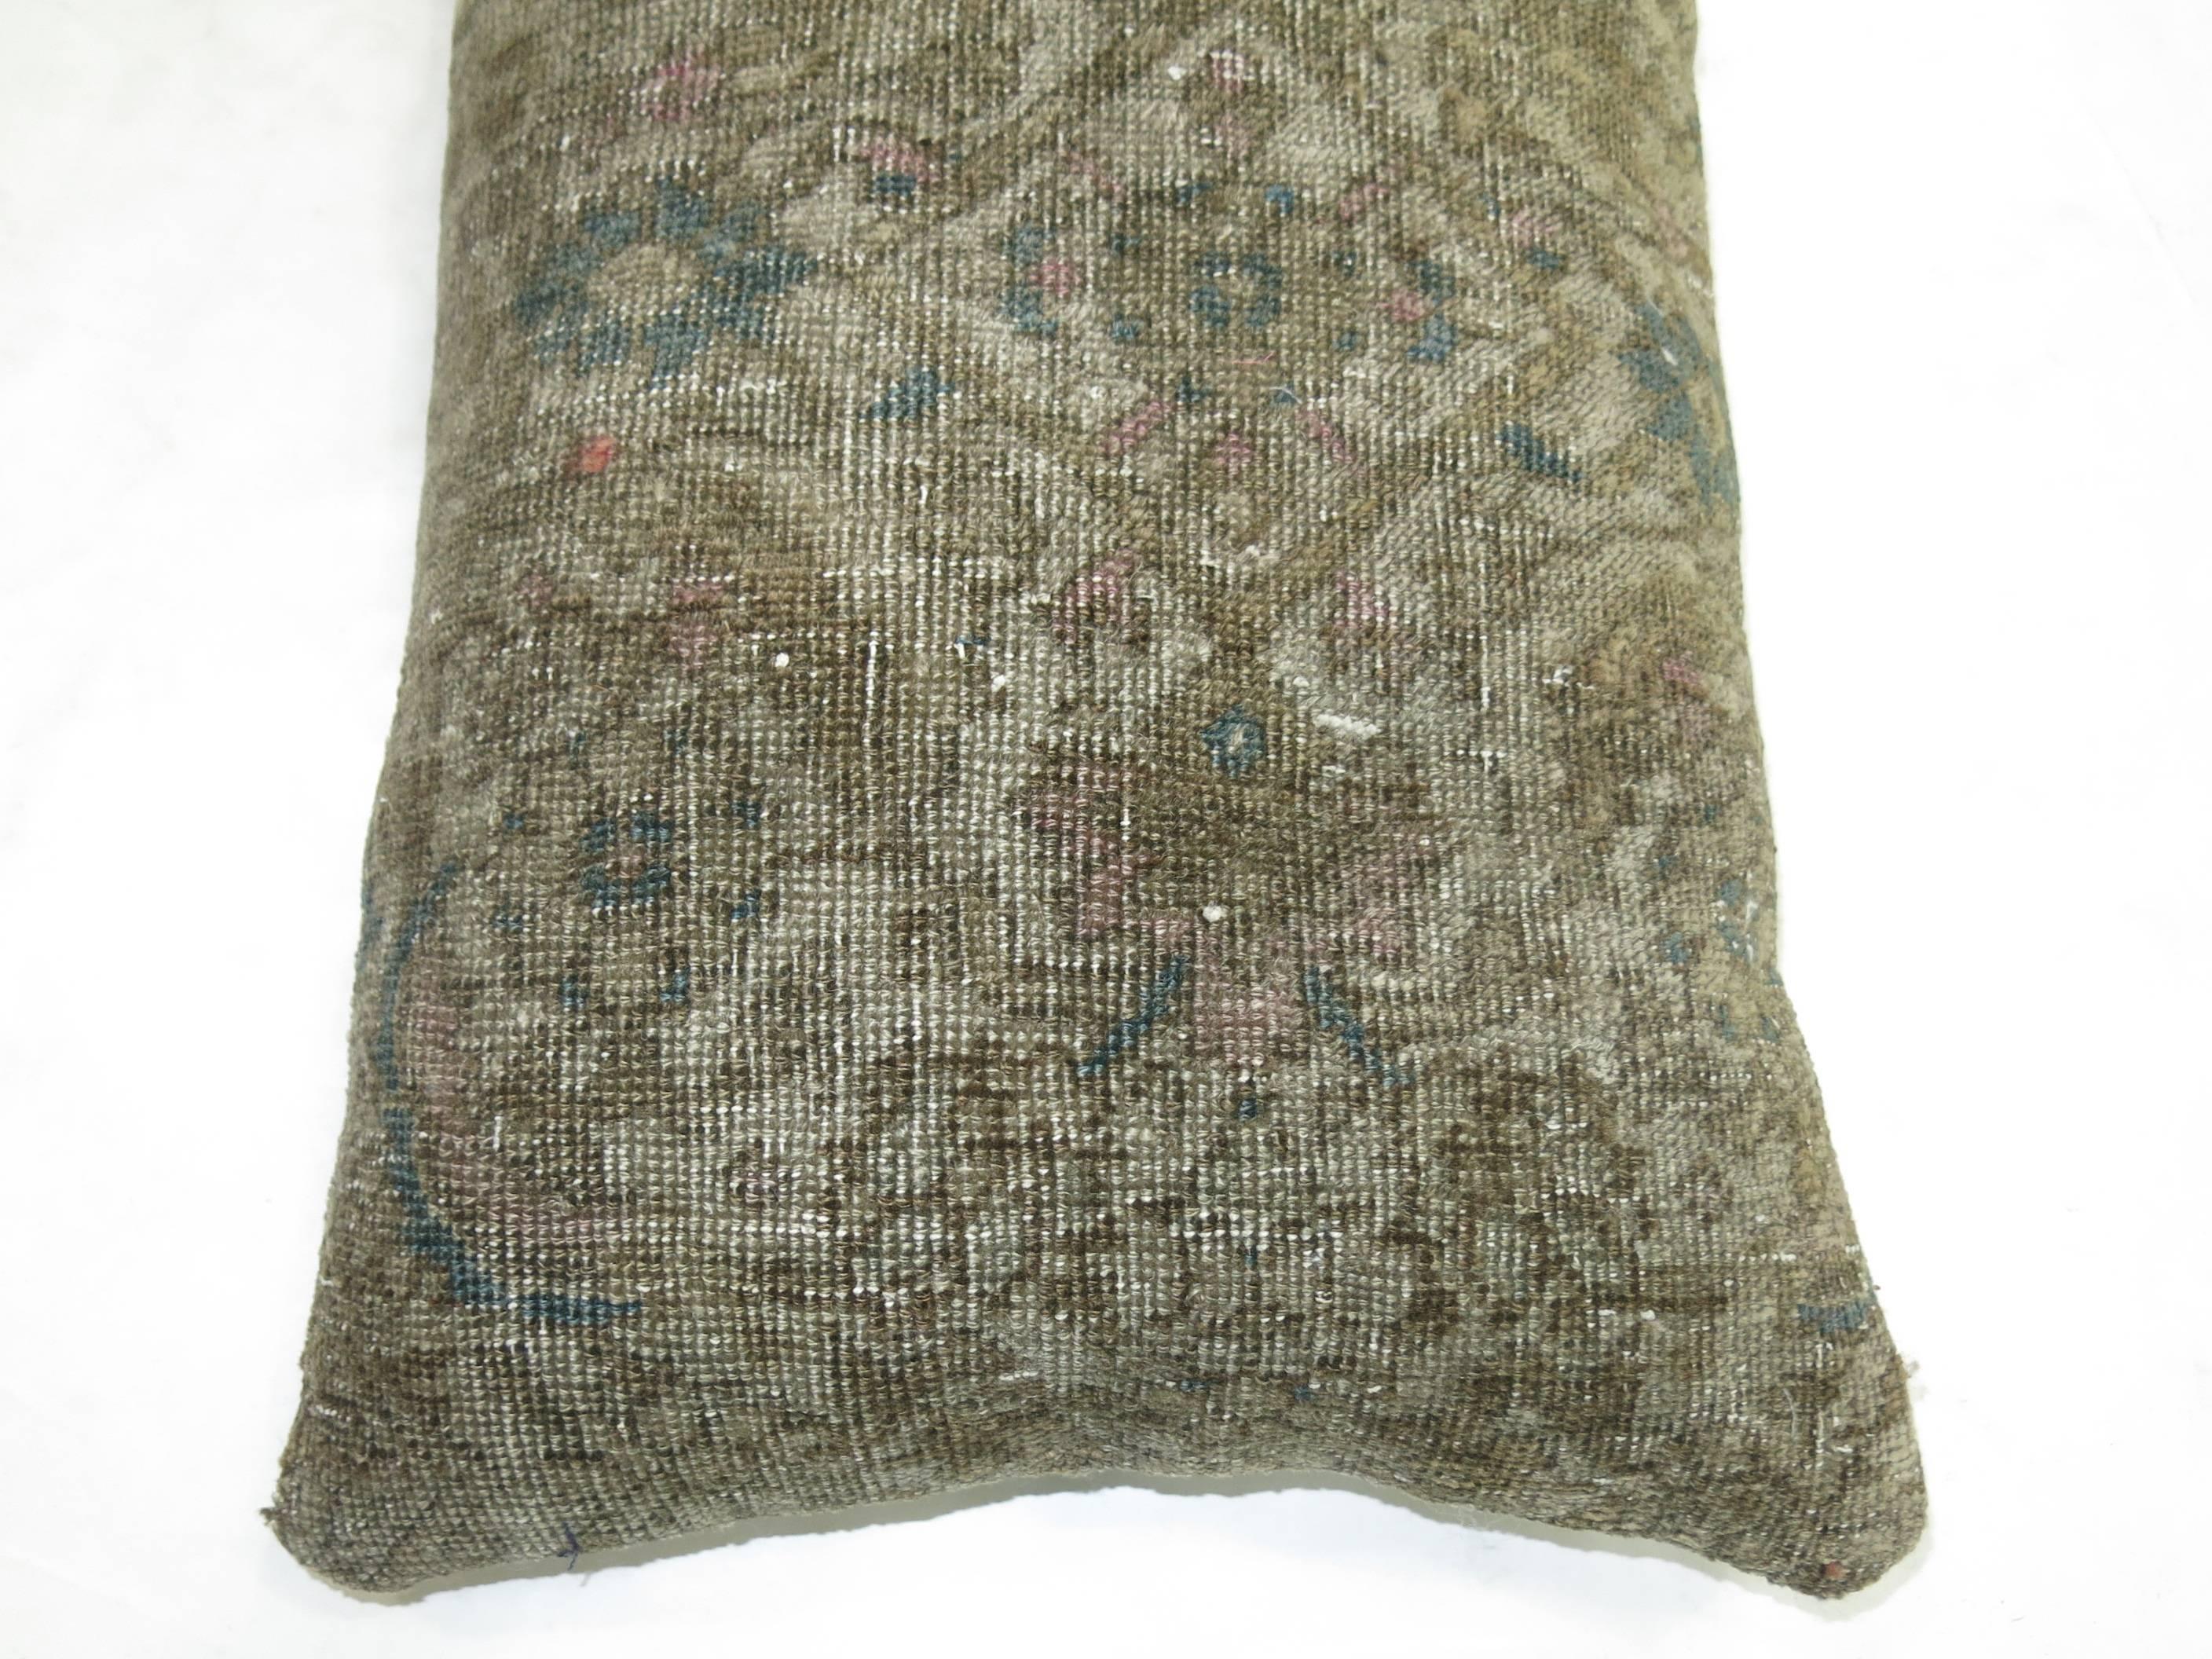 Pillow made from a vintage Persian rug.

15'' x 23''